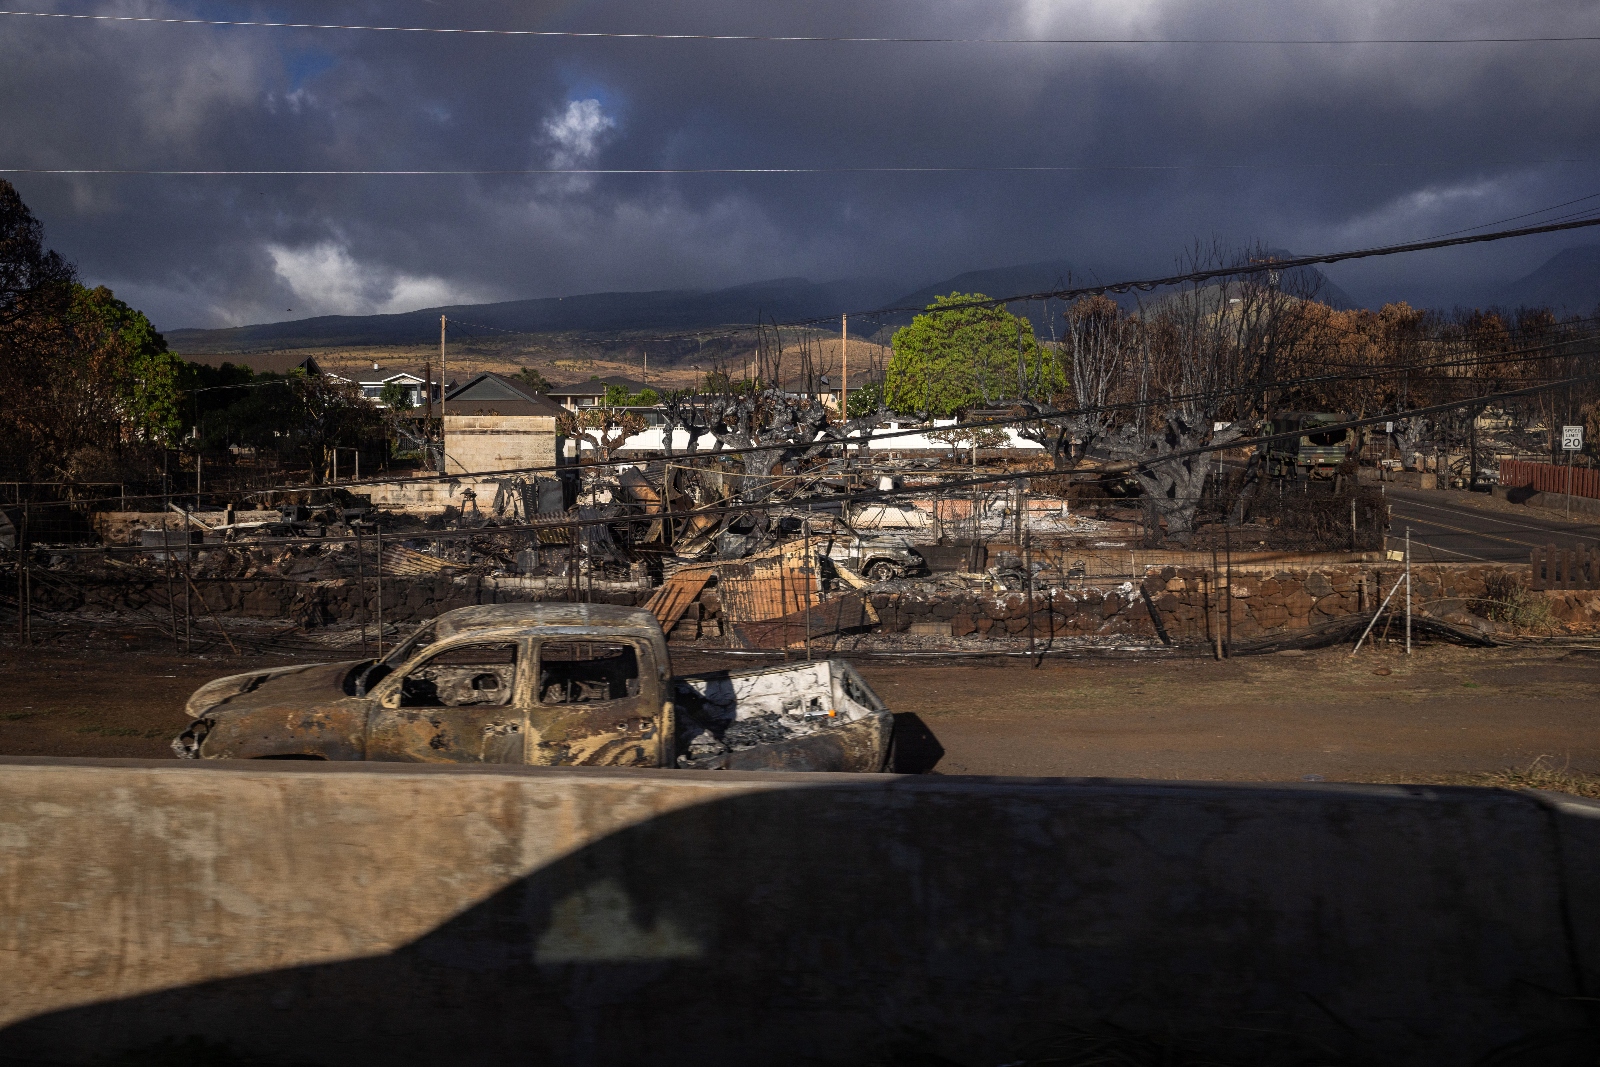 Victoria Gladden and her daughters drive past homes that were burned in the August wildfires that destroyed much of Lahaina, Hawaiʻi.